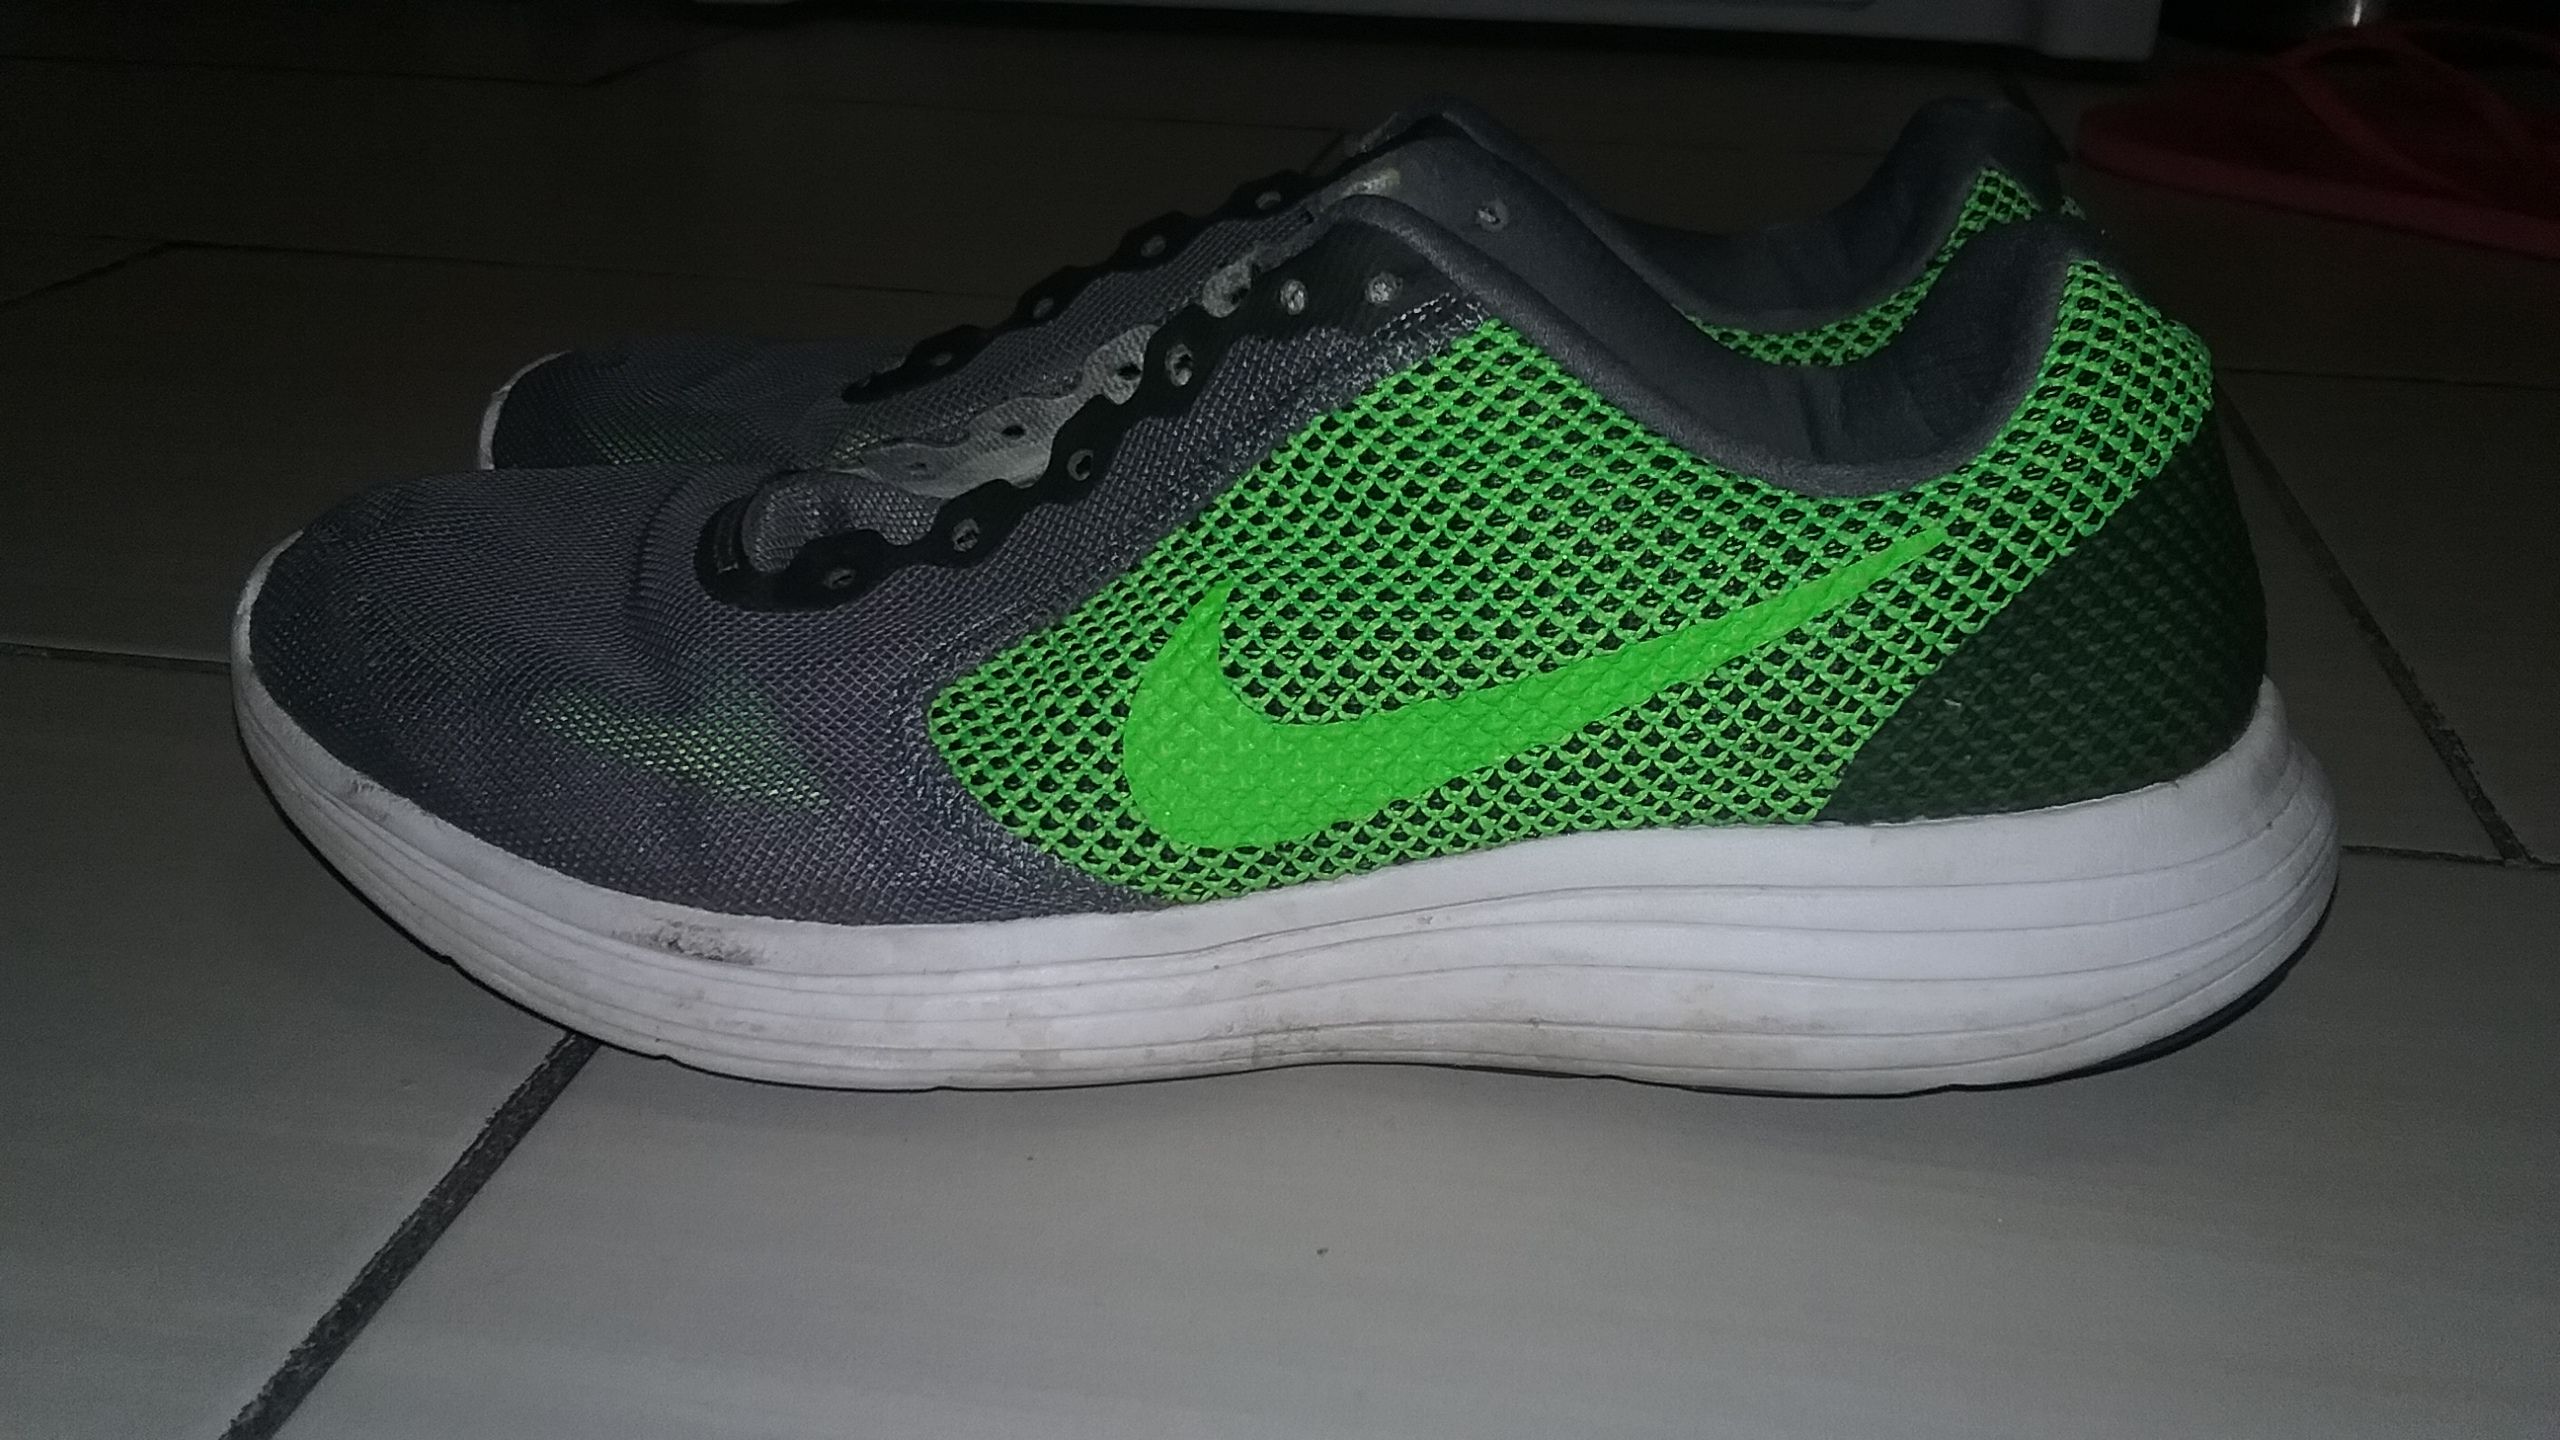 Nike shoe size 9 and 1/2